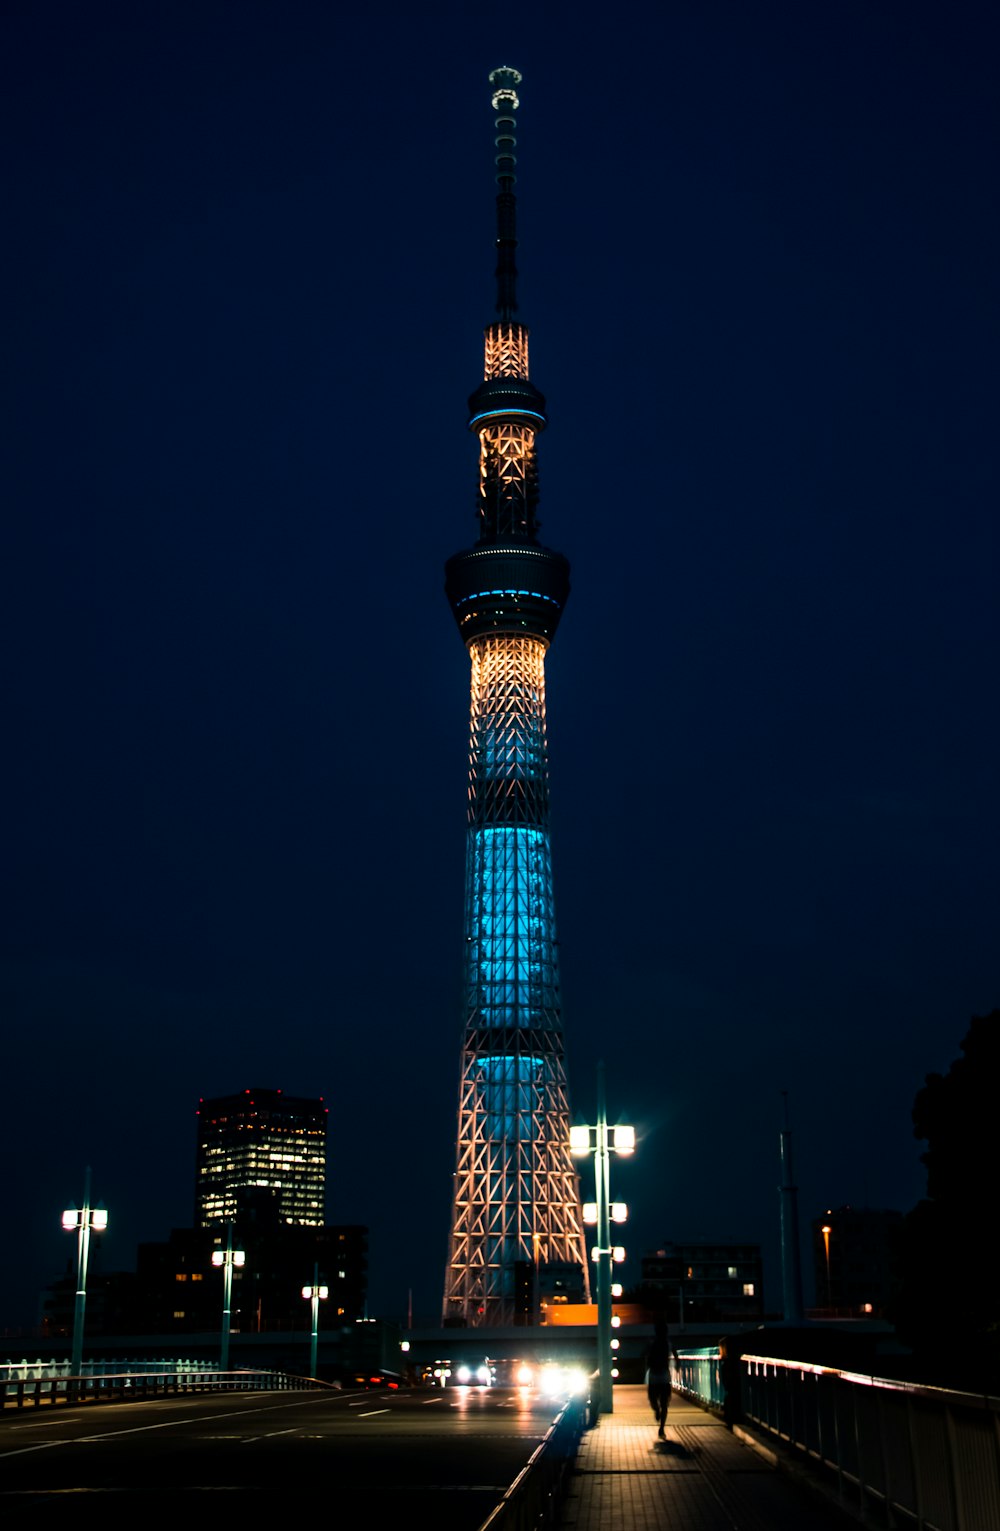 lighted tower during night time